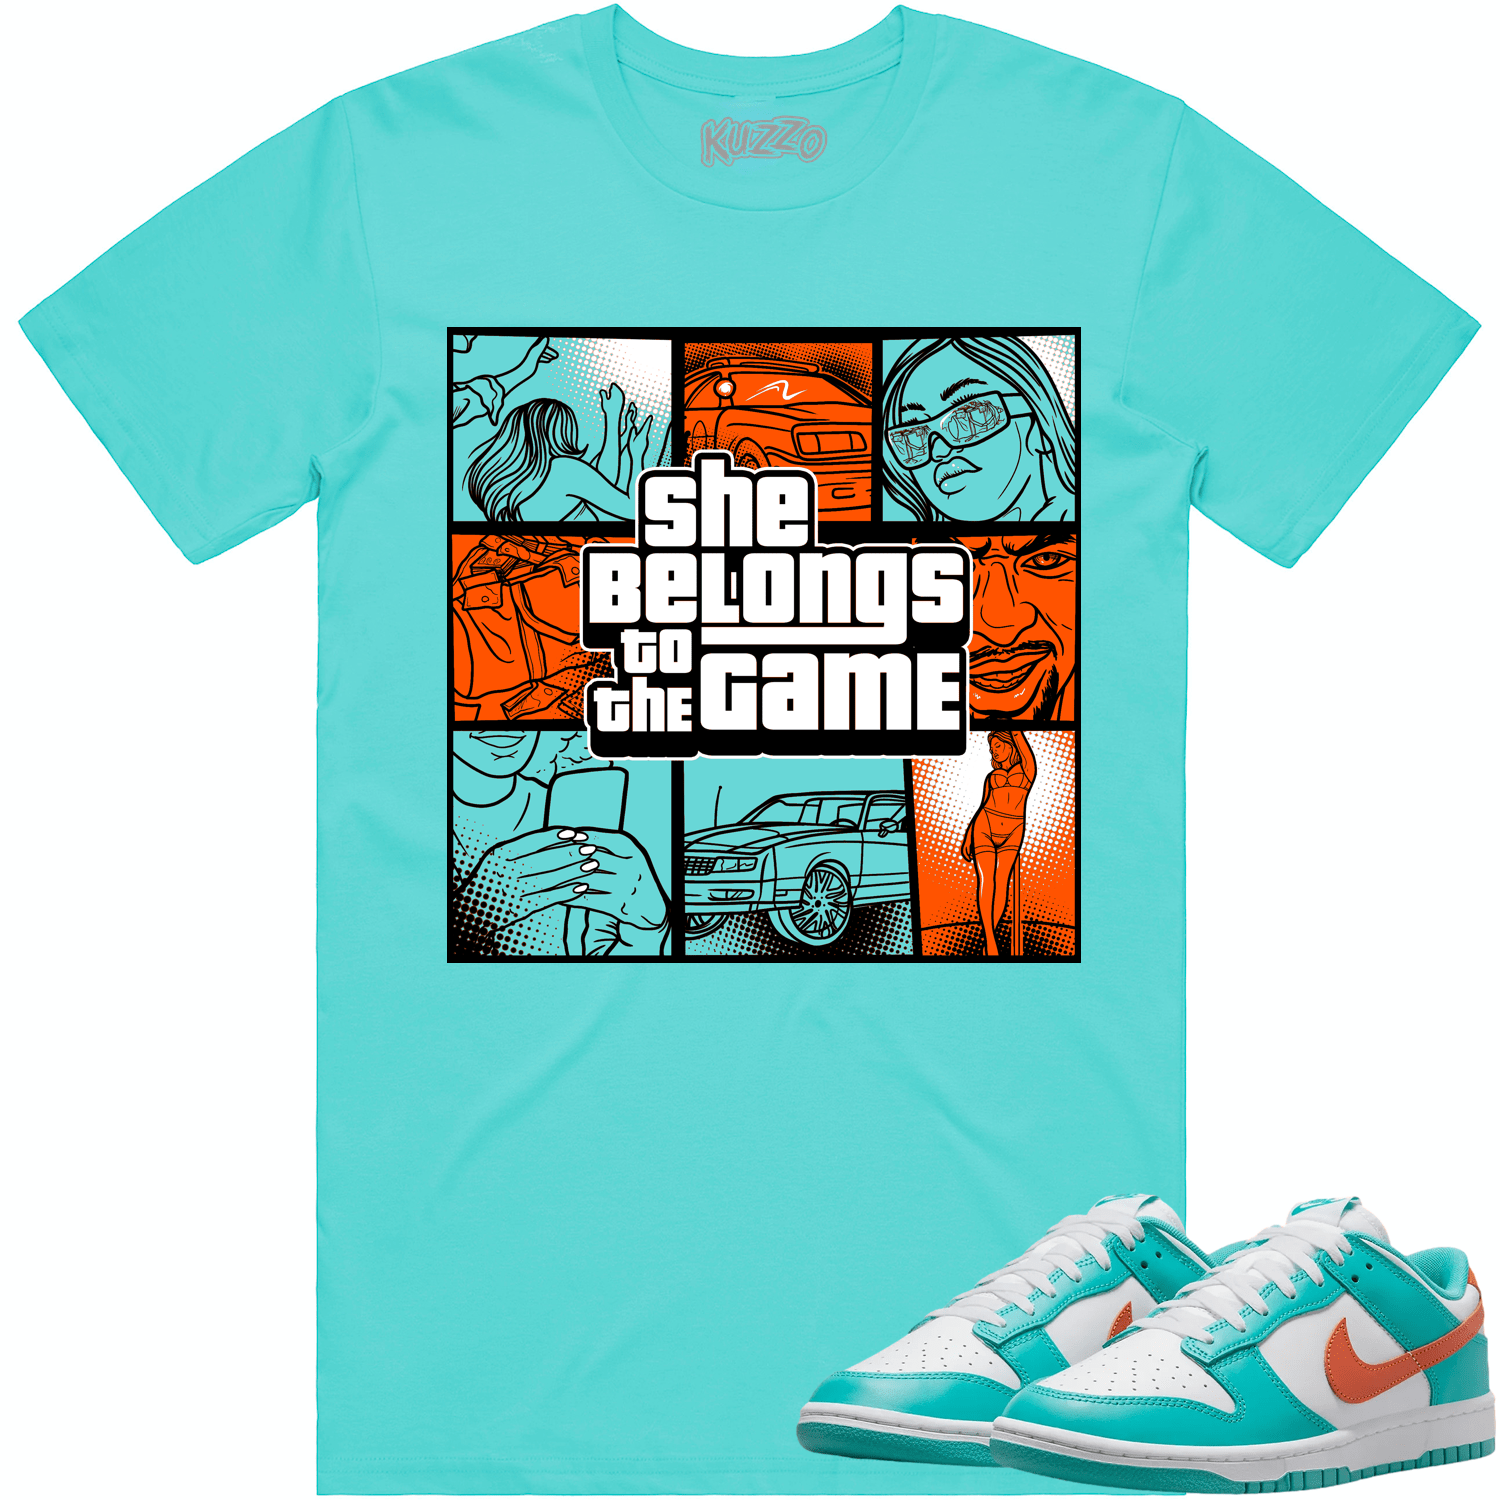 Miami Dunks Shirt - Dolphins Dunks Sneaker Tees - Game